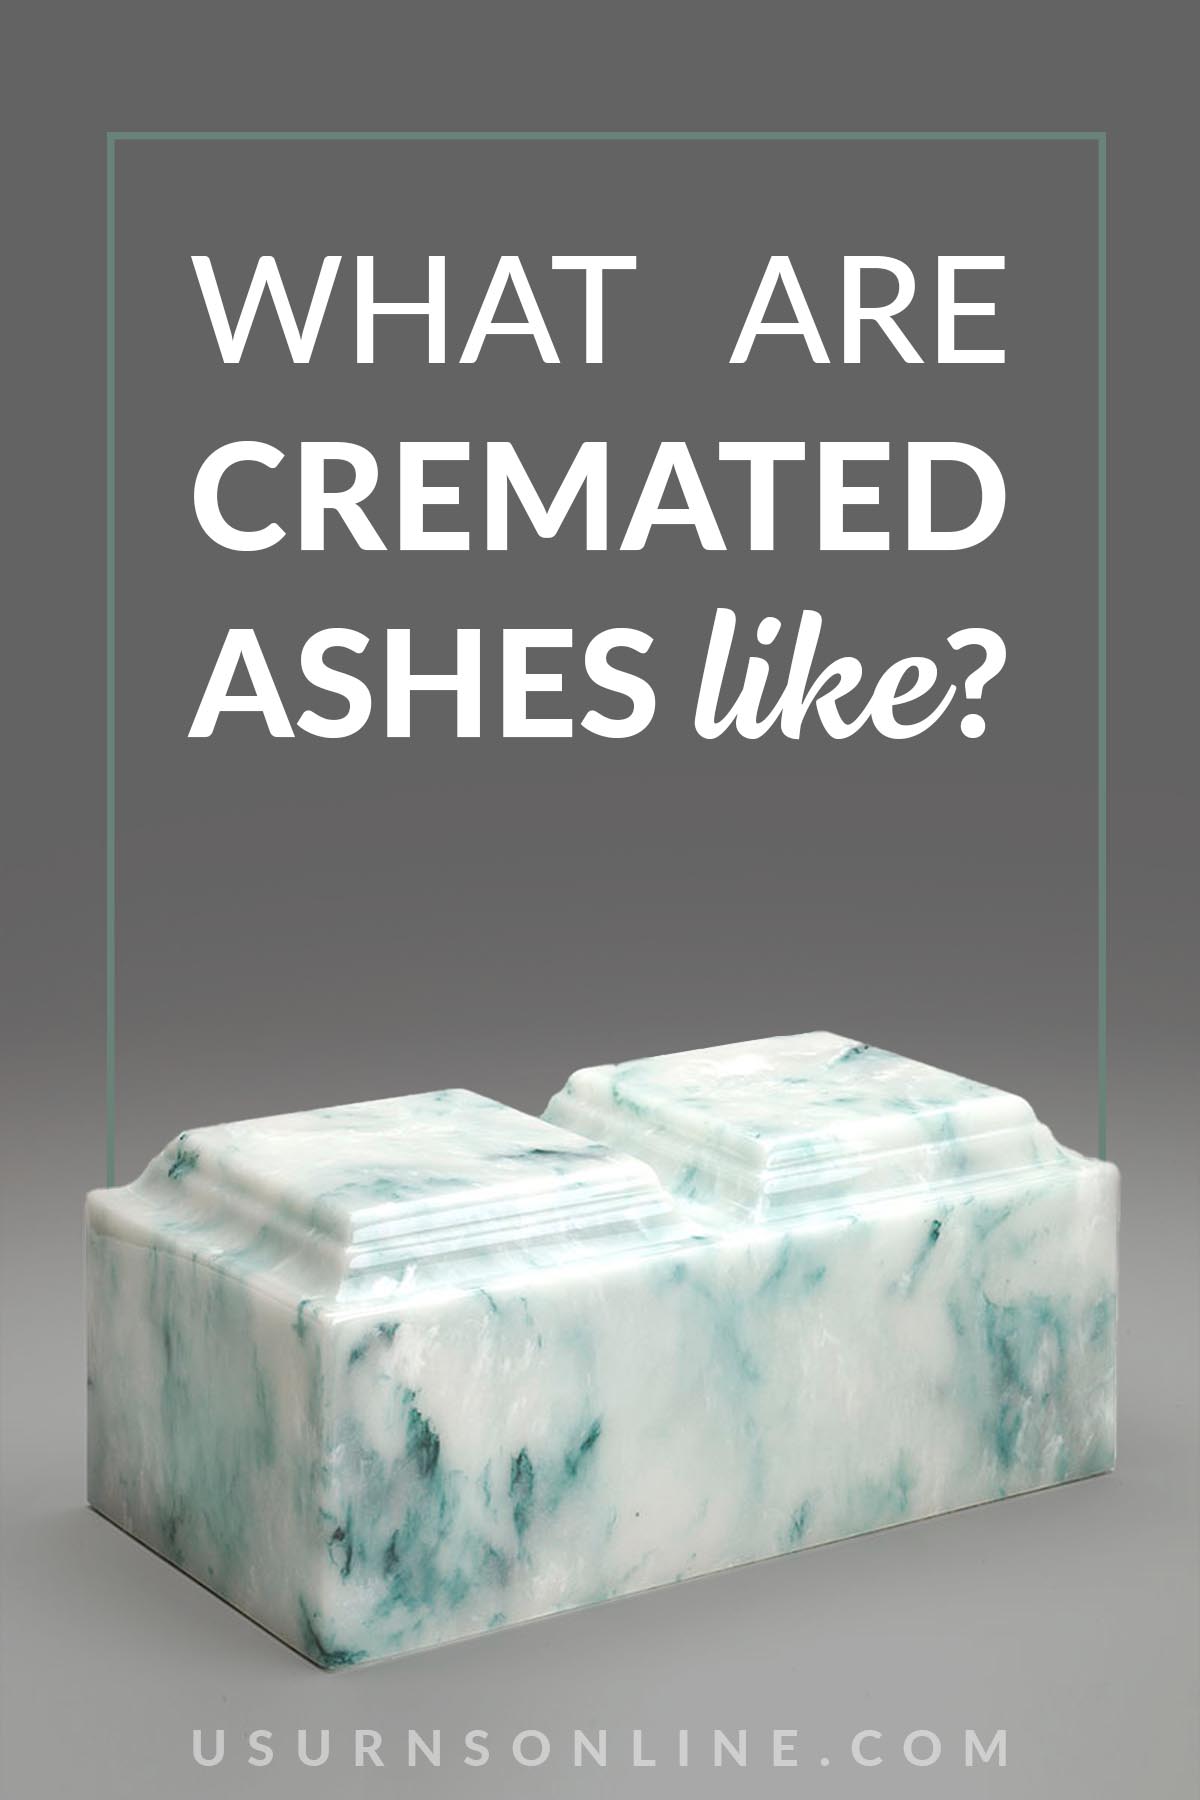 cremated ashes